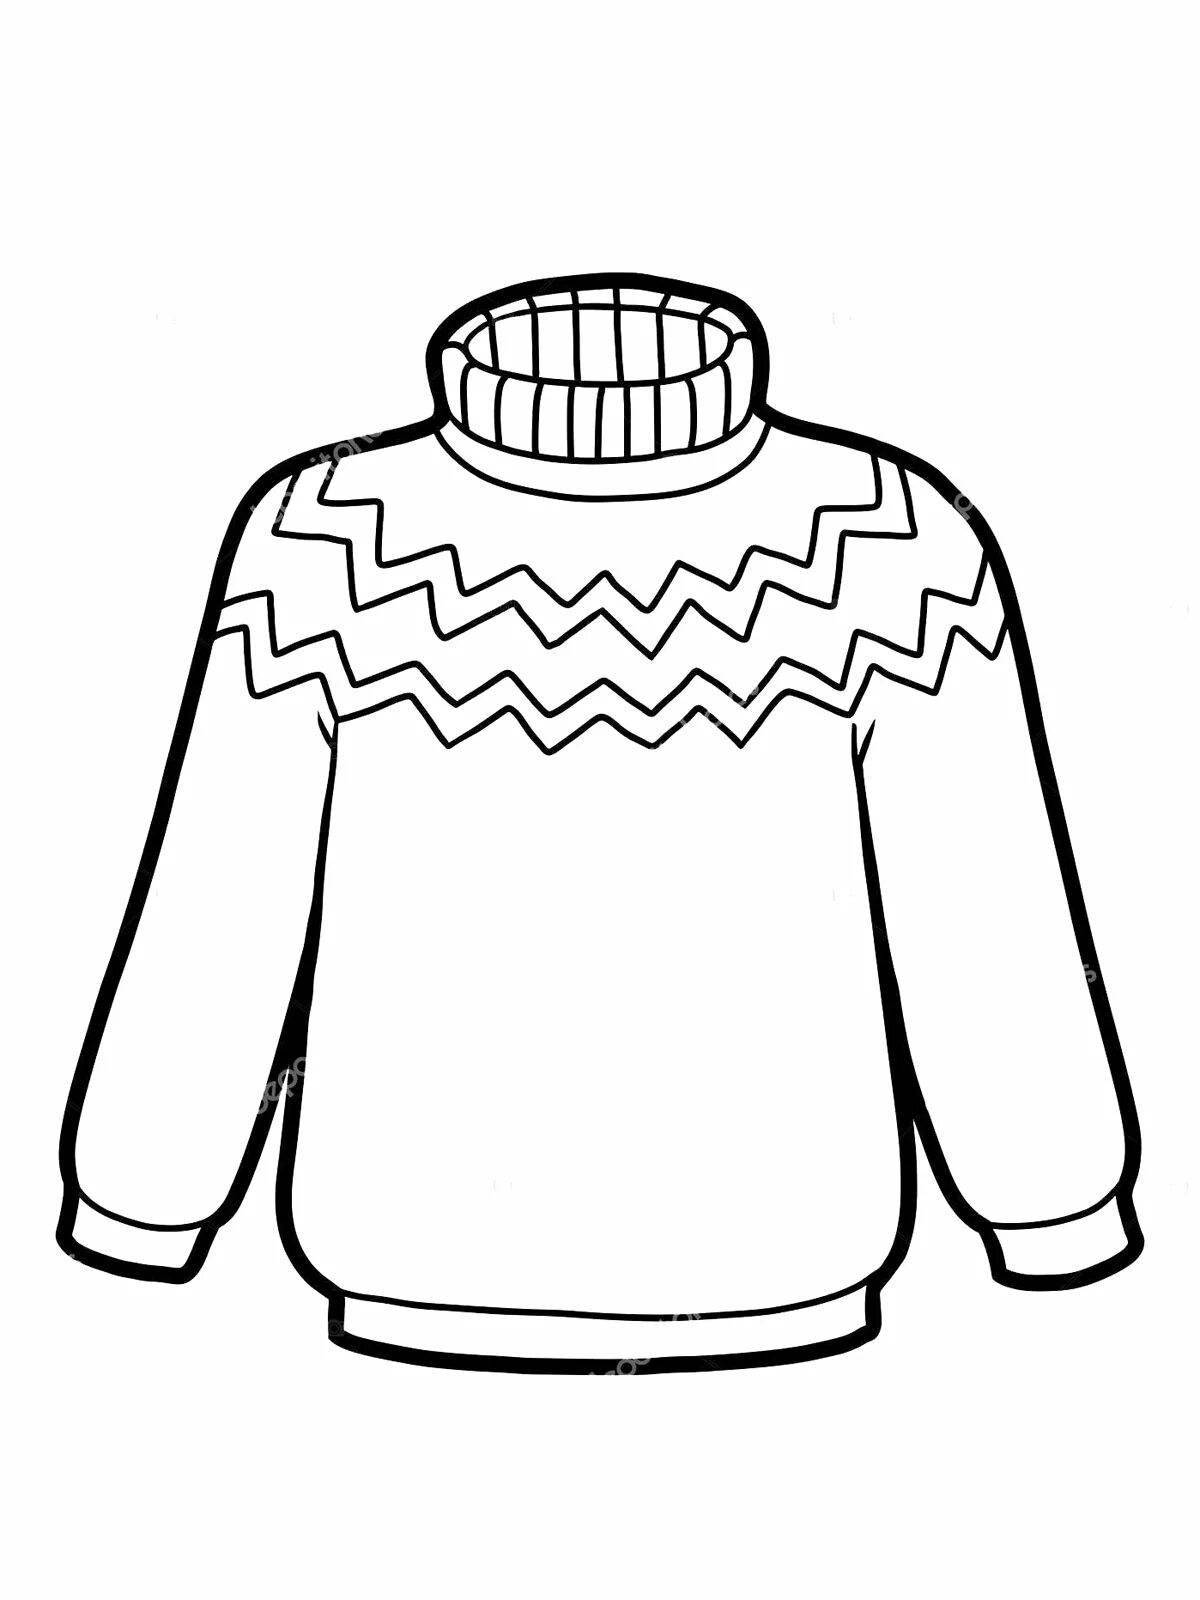 Fun sweater coloring for 4-5 year olds